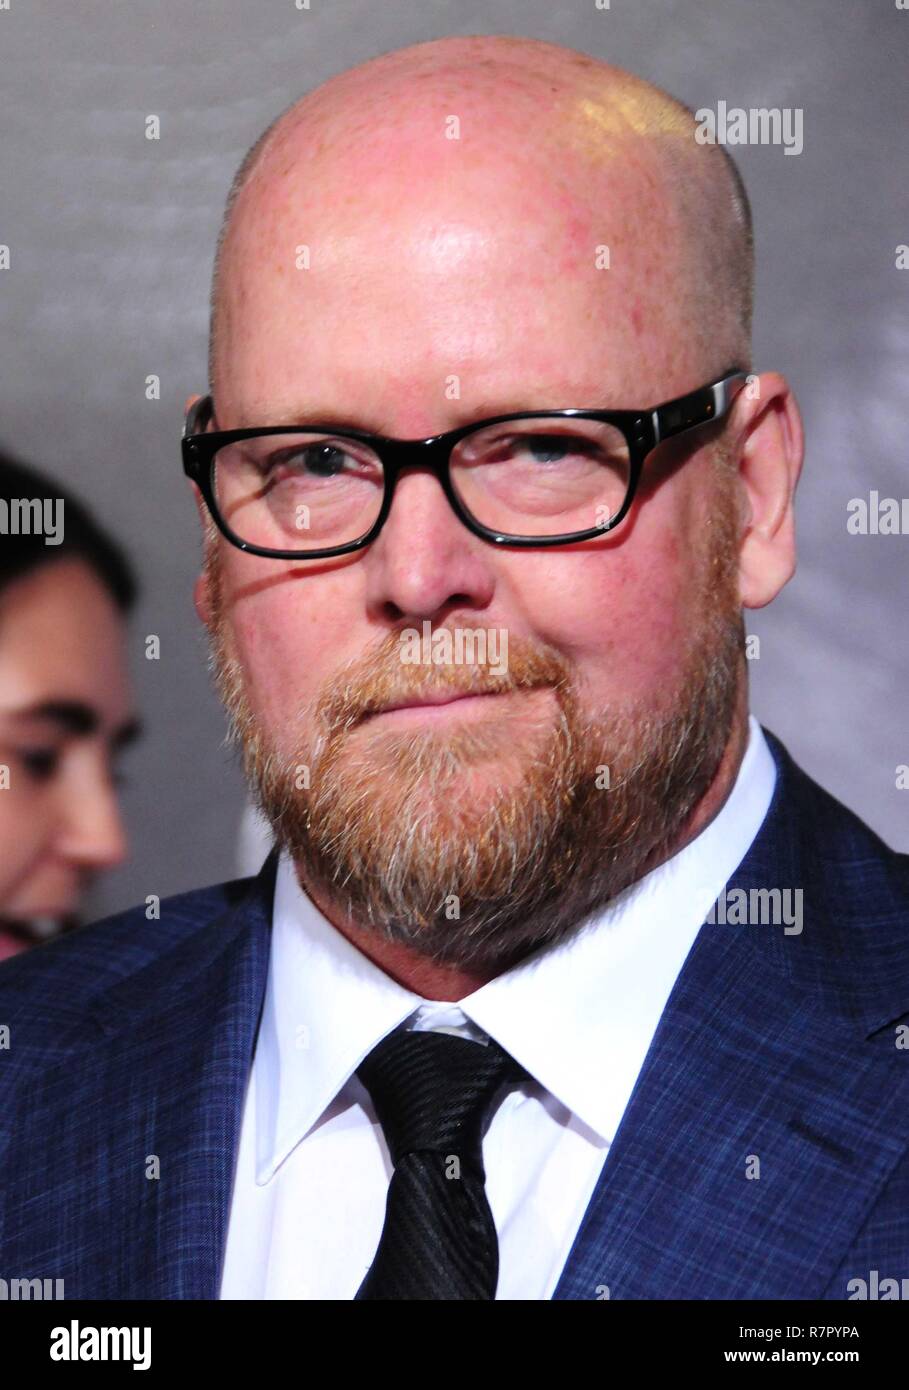 Westwood, California, USA. 10th Dec 2018. WESTWOOD, CA - DECEMBER 10: Screenwriter Nick Schenk attends the World Premiere of Warner Bros. Pictures' 'The Mule' on December 10, 2018 at Regency Village Theatre in Westwood, California. Photo by Barry King/Alamy Live News Stock Photo